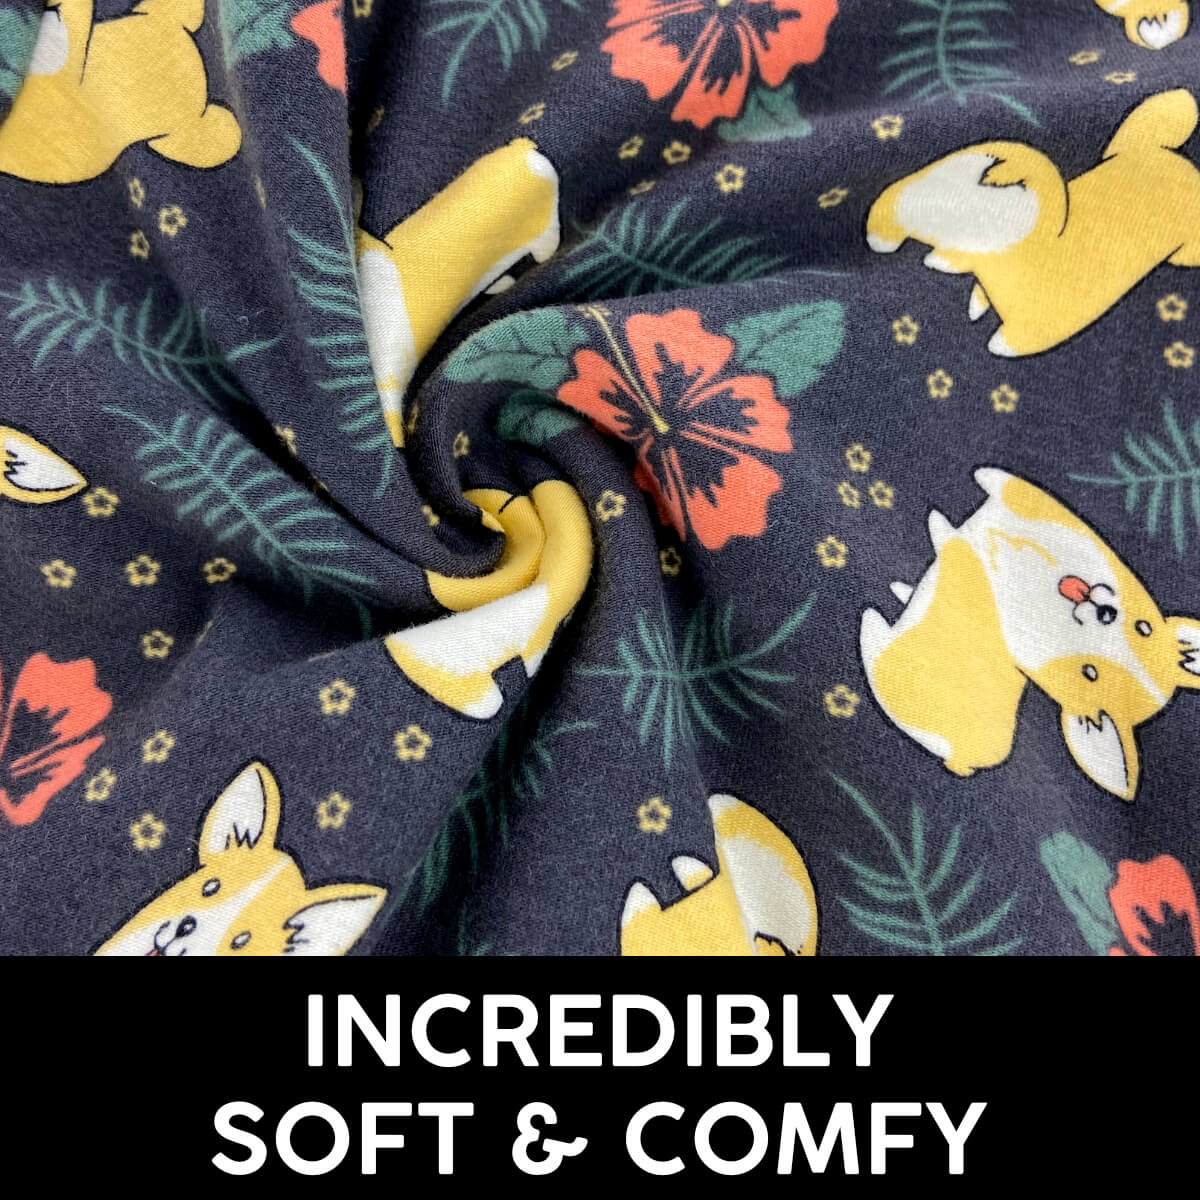 Unbelievably Soft Jersey Cotton Knit Pajamas in Fun Novelty Prints. If you're looking for a  pair of go-to shorts to wear around the house then look no further! 